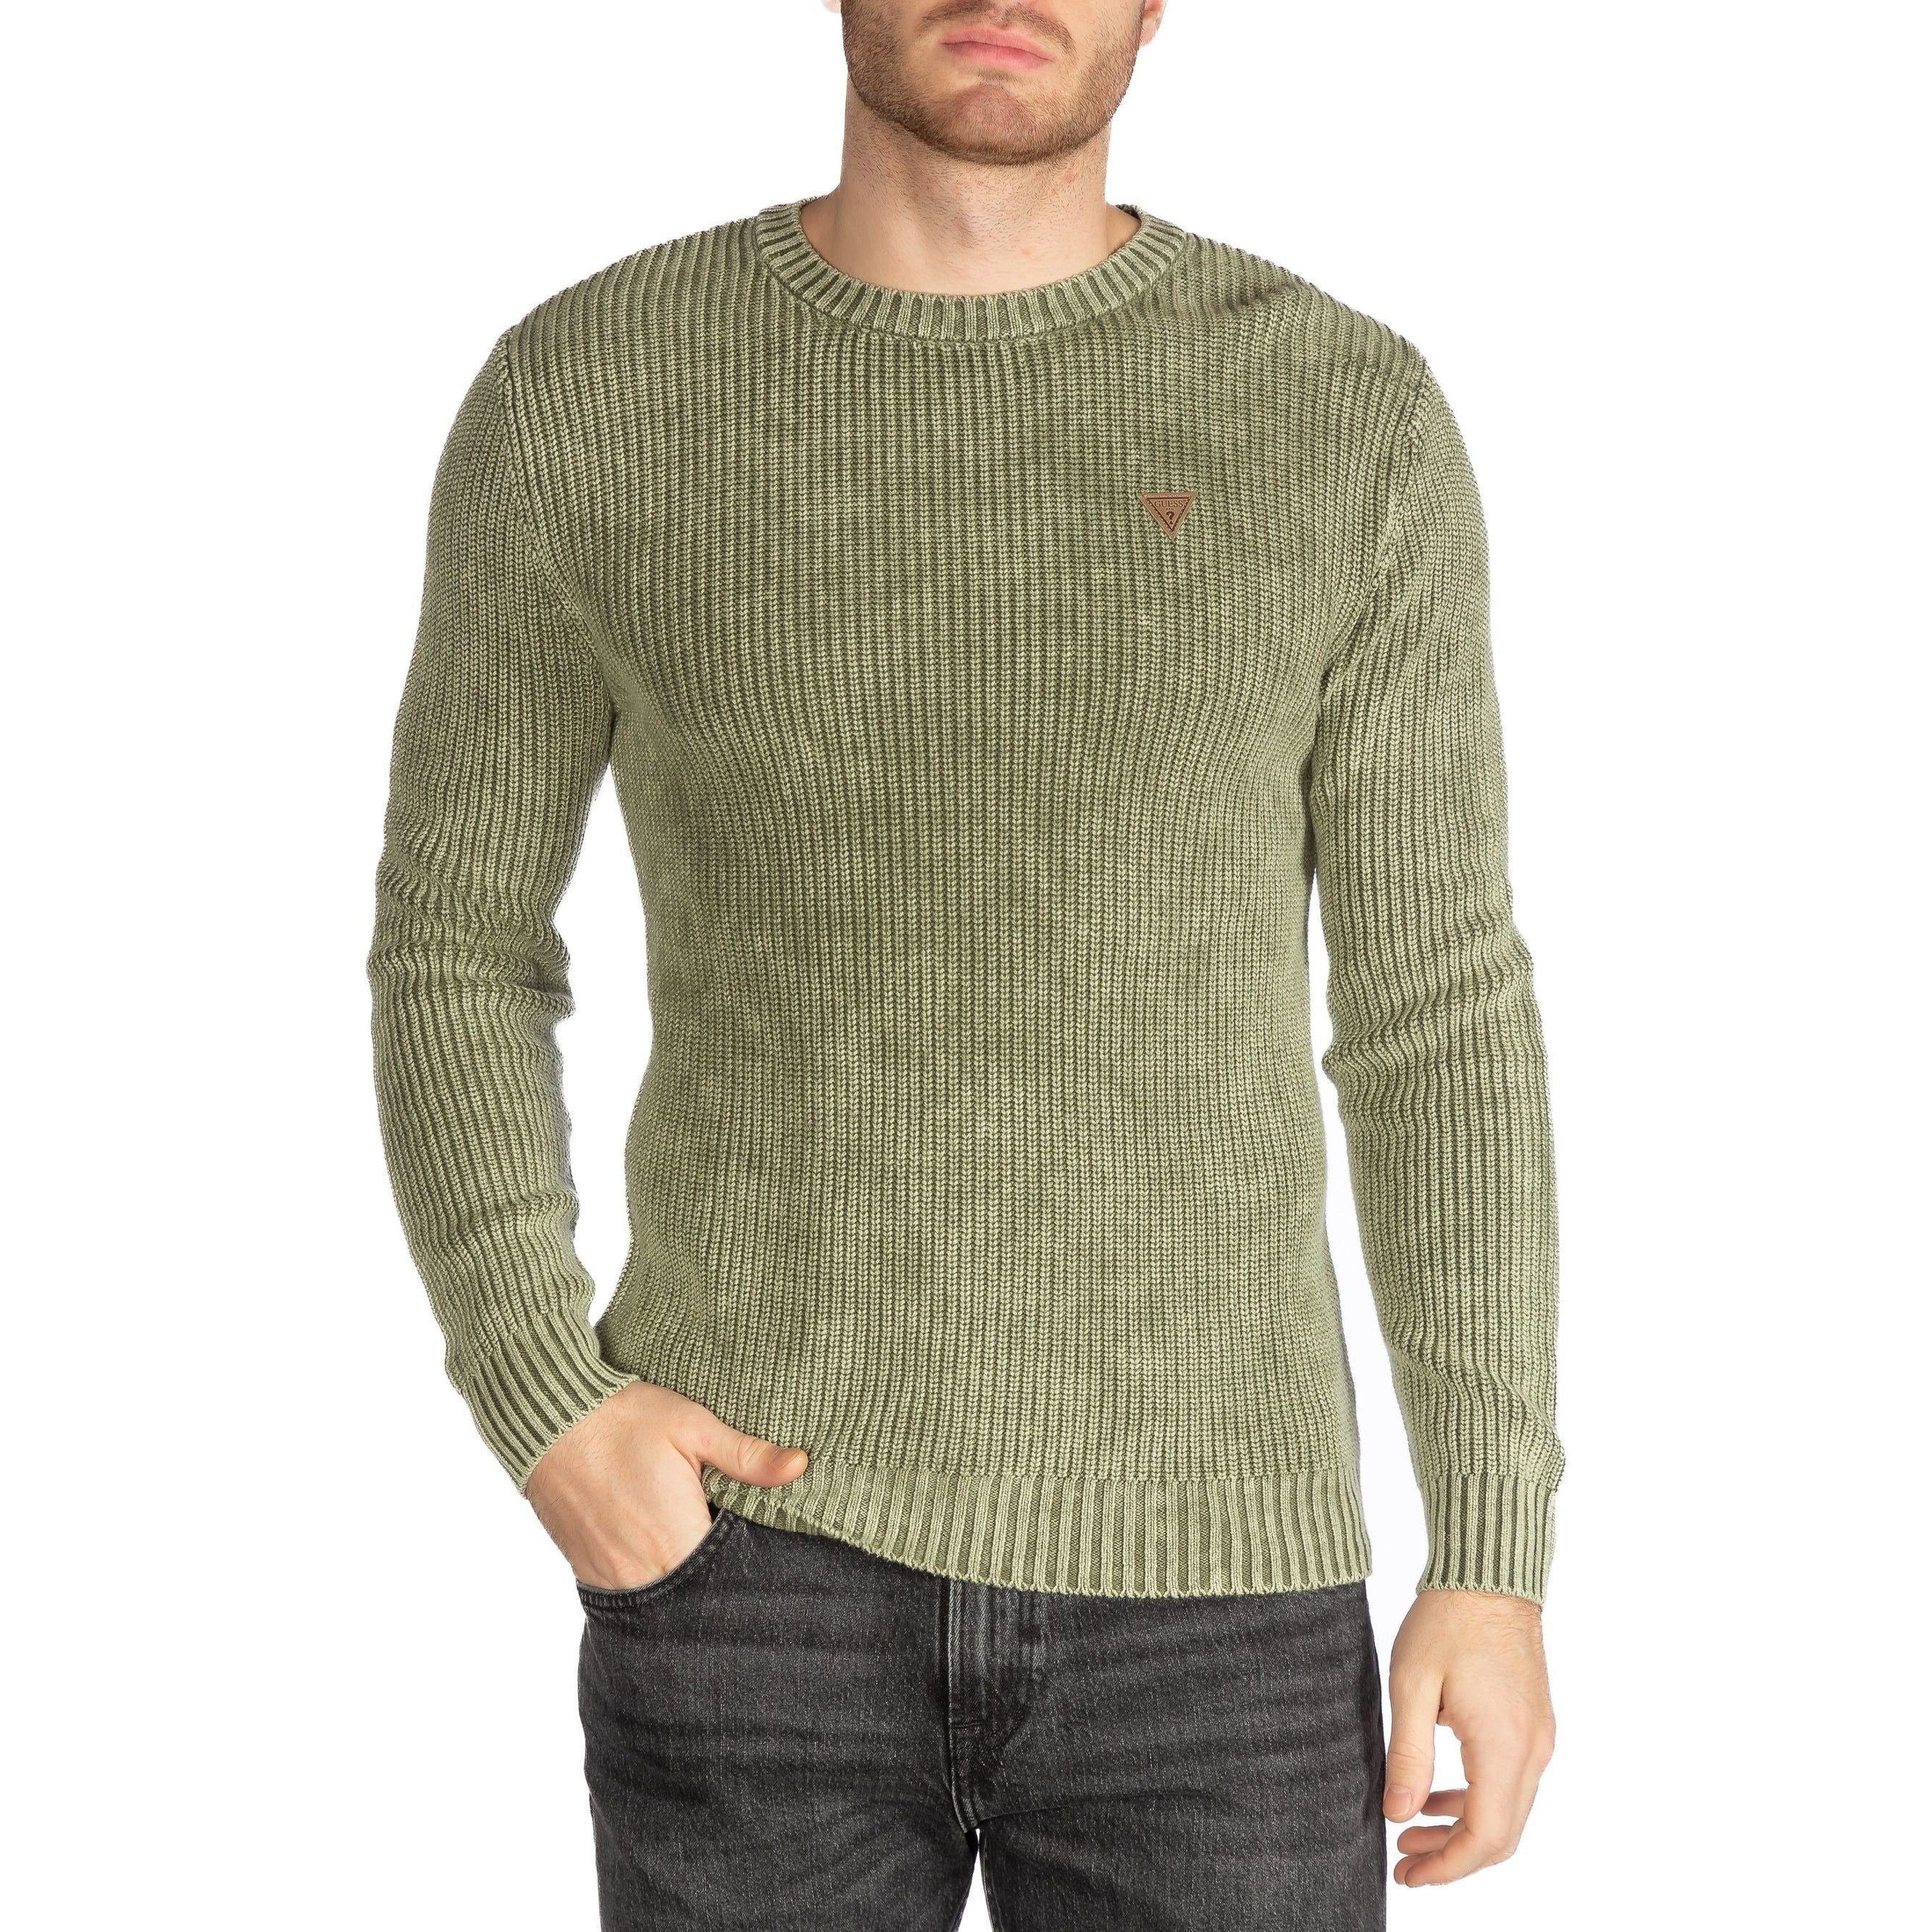 Guess - Angus Ribbed Sweater in Dusty Sage-SQ0378355